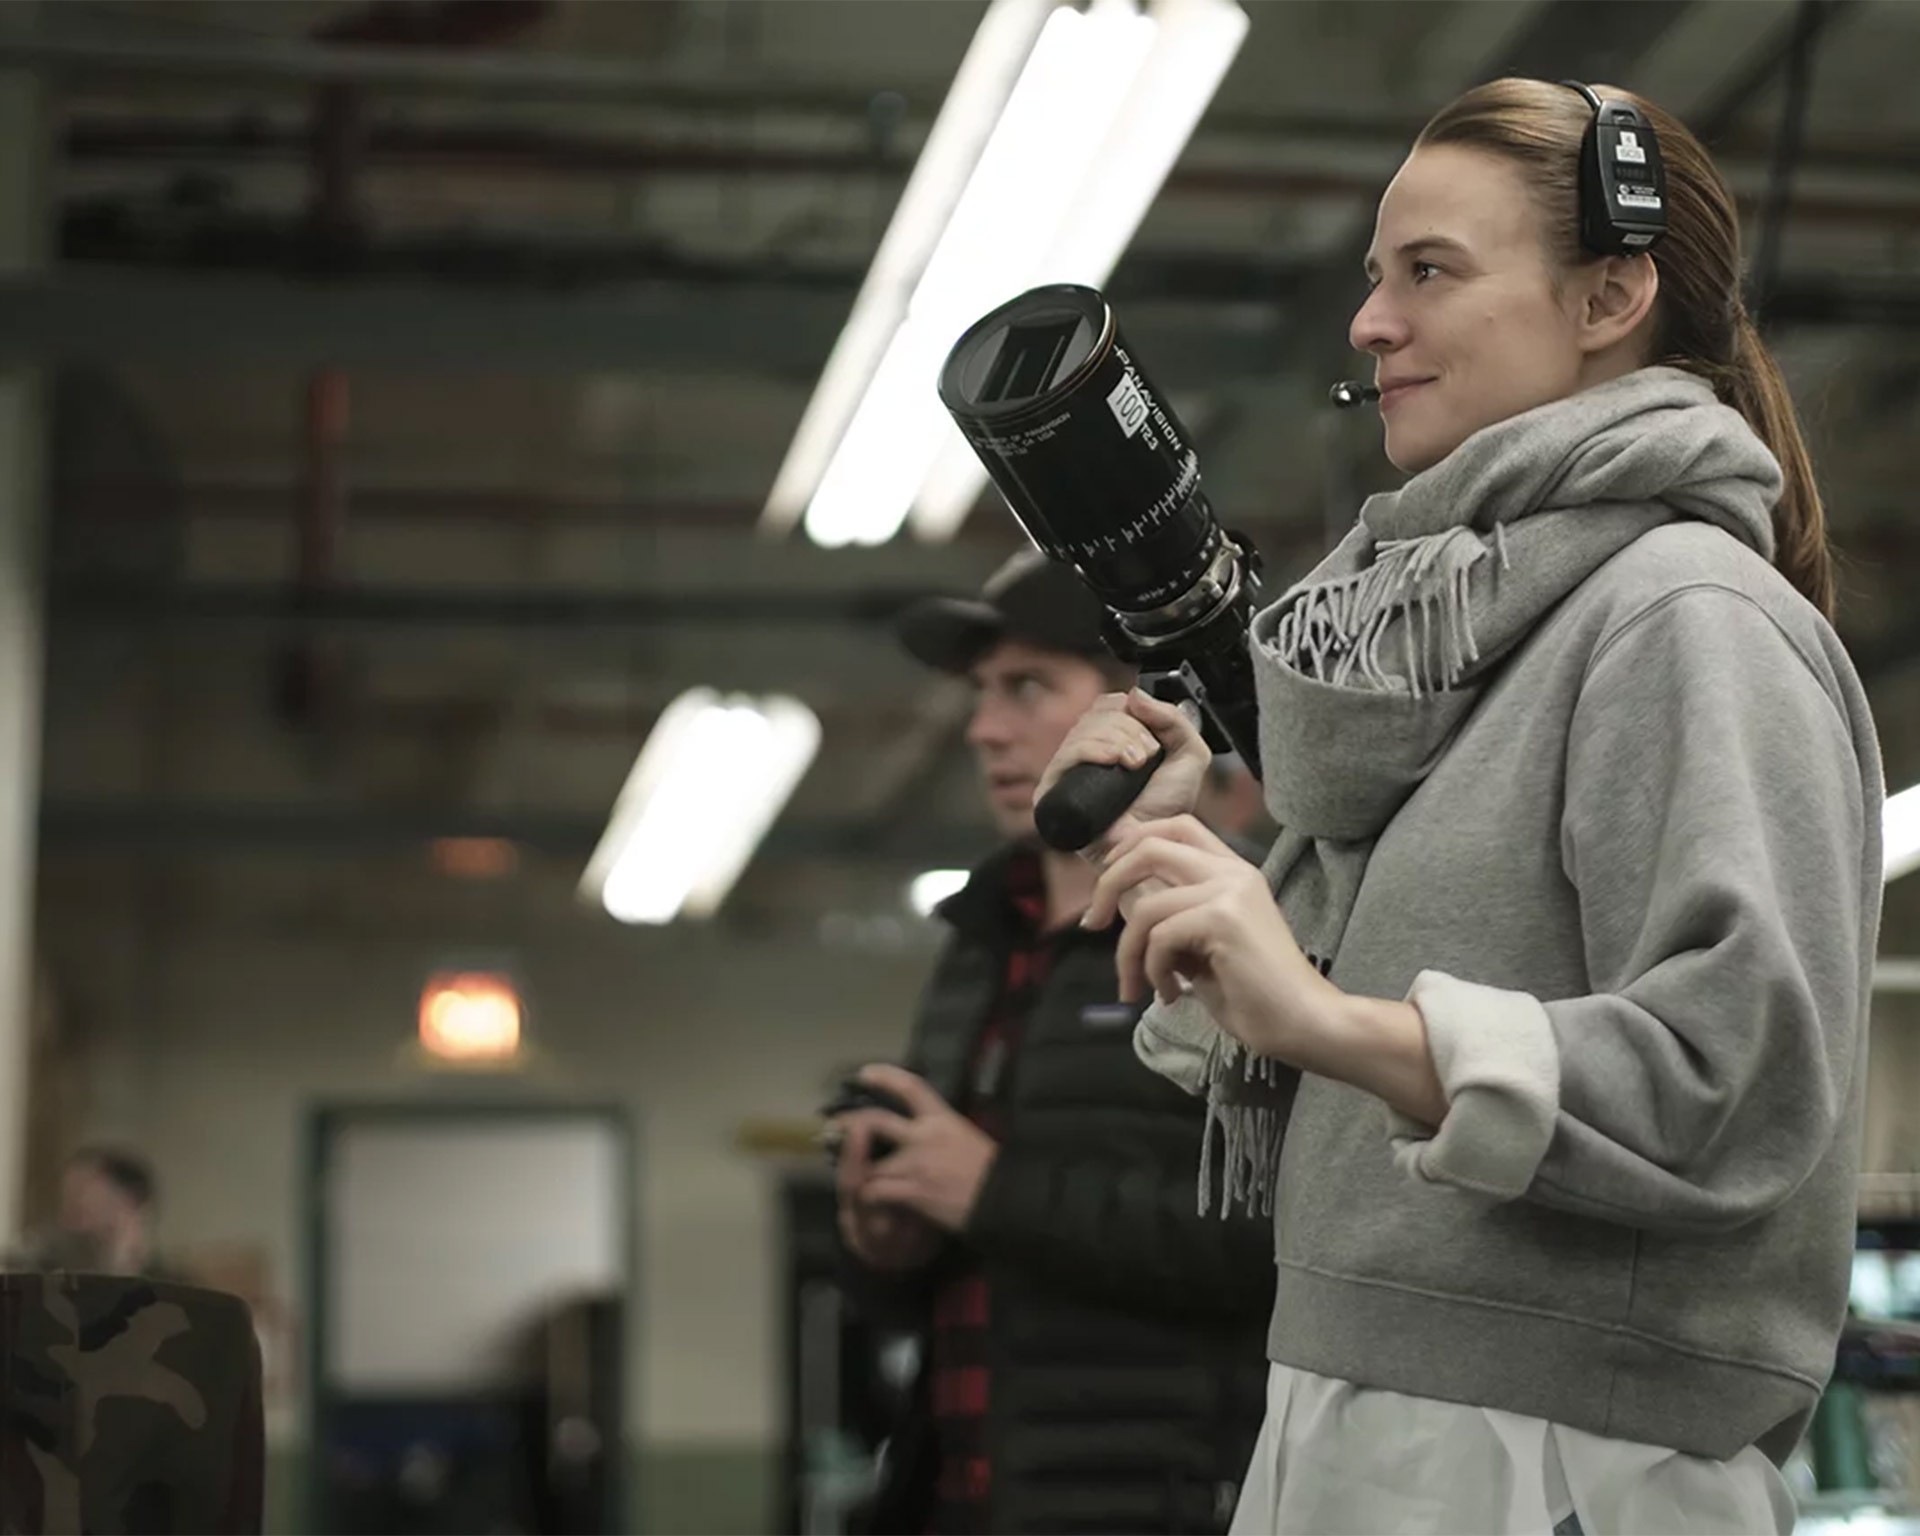 Up on the silver screen with cinematographer Jessica Lee Gagné